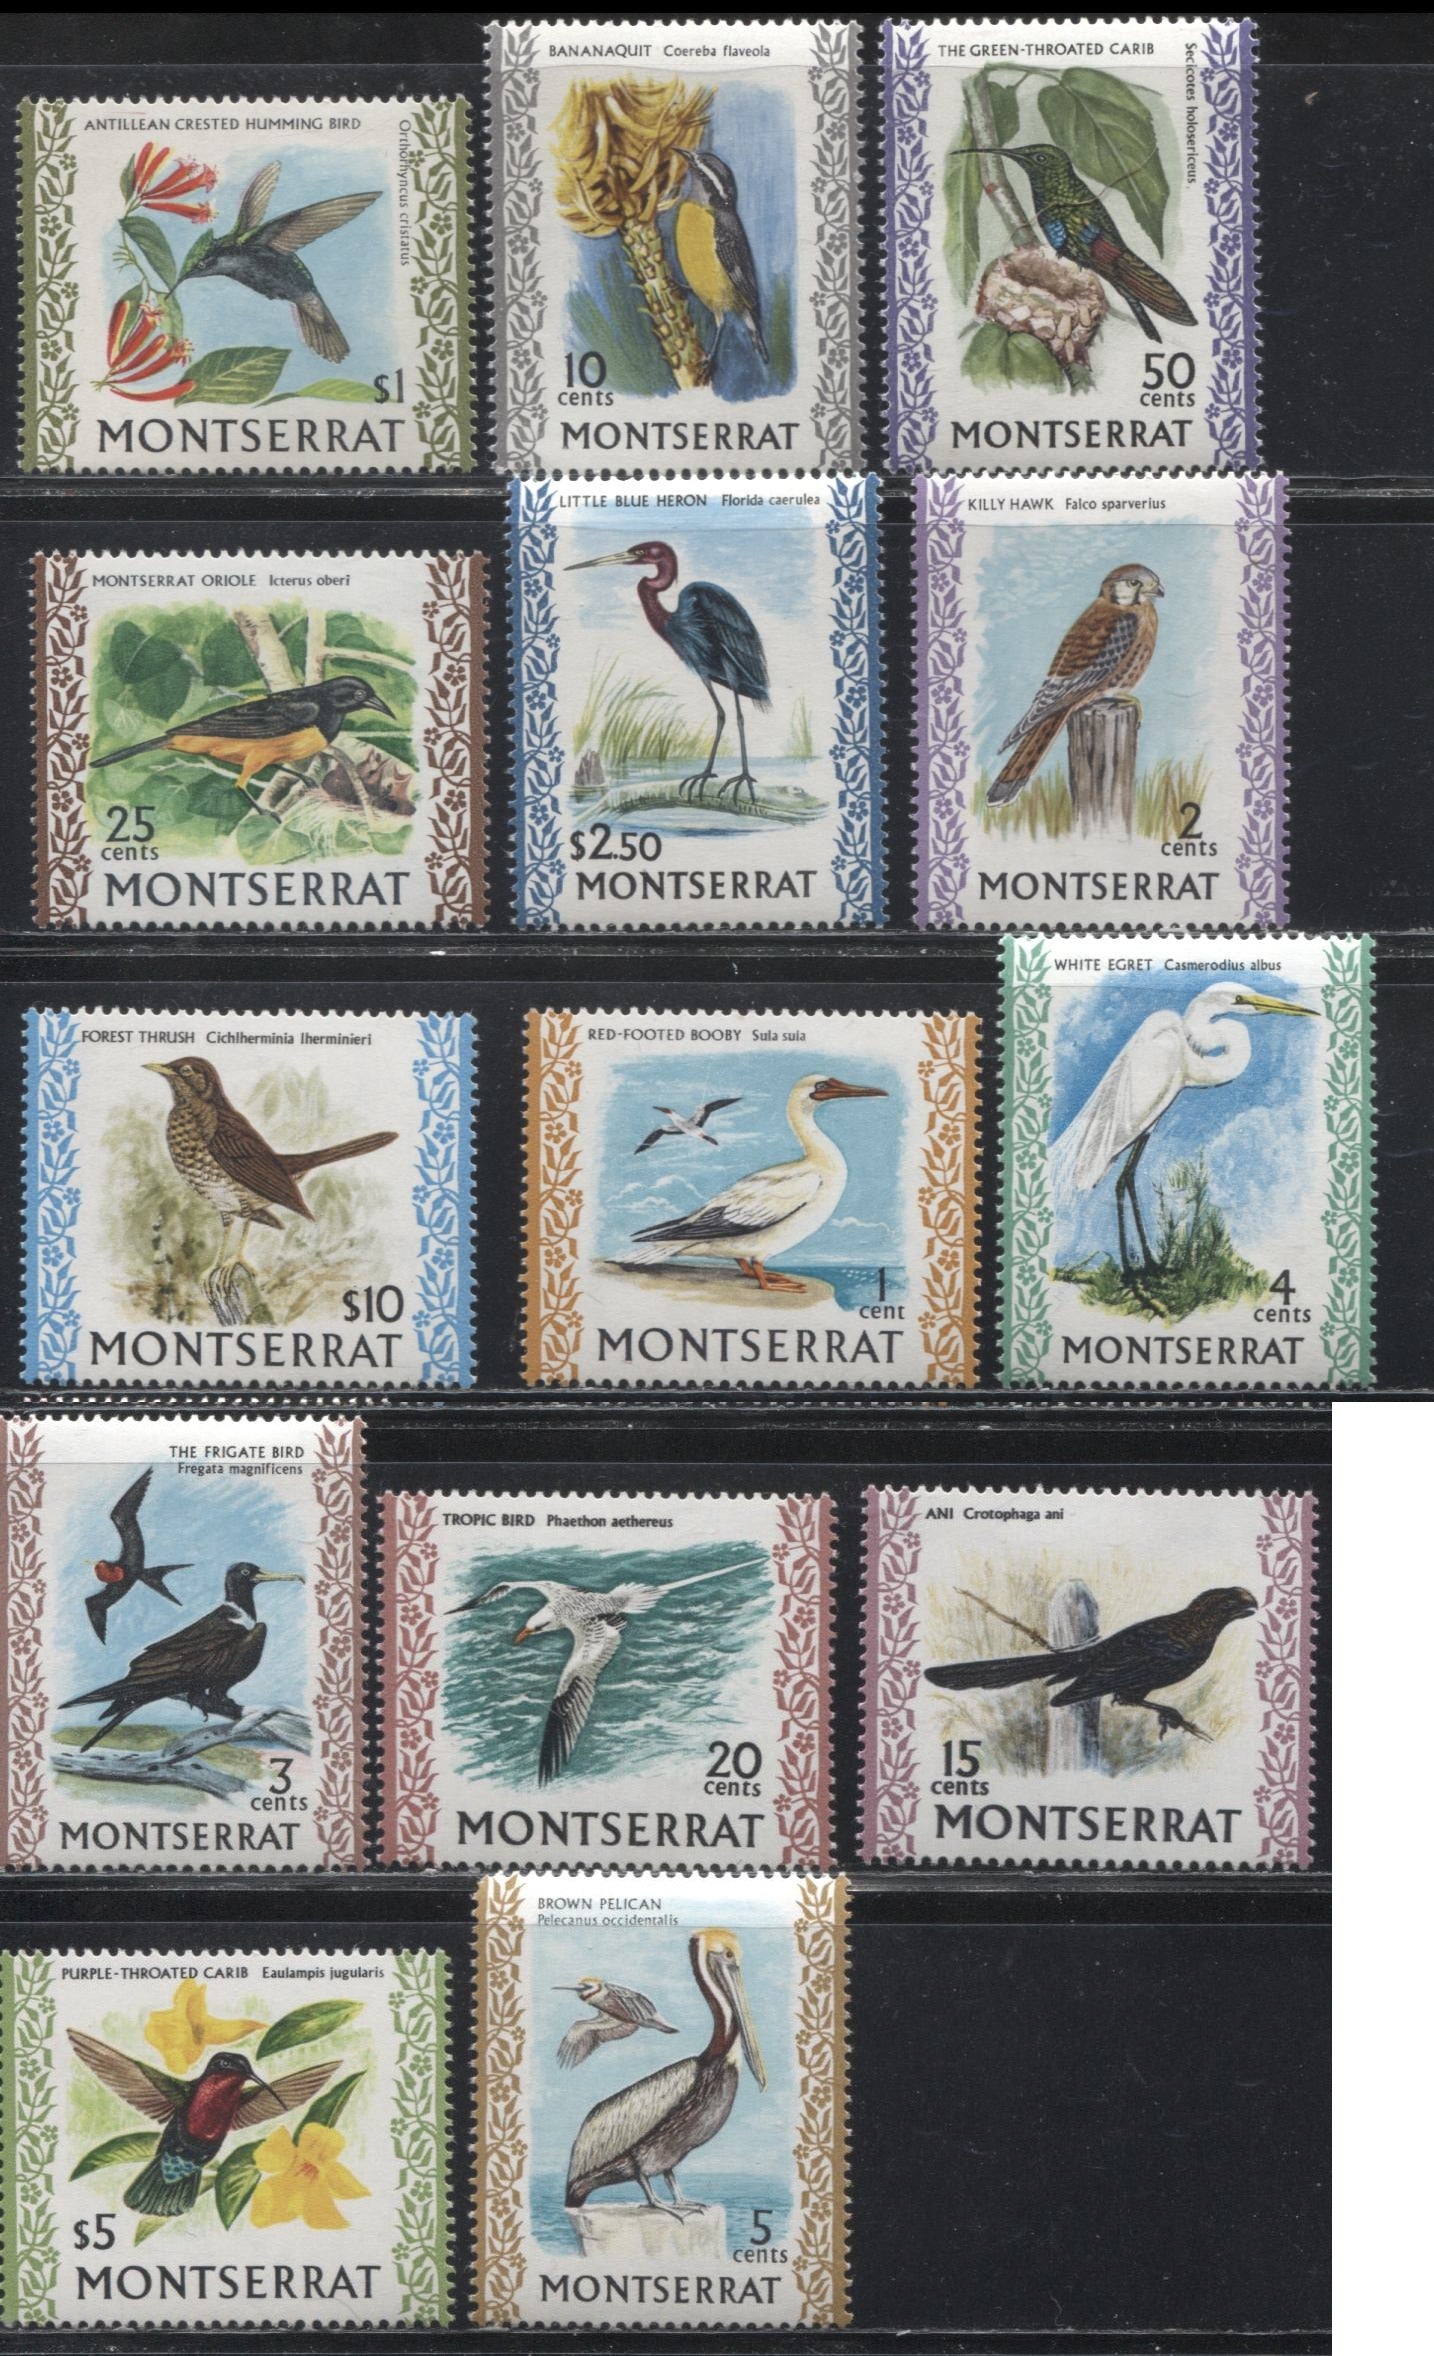 Lot 248 Montserrat SG #242/254c 1970-1974 Bird Definitive Issue A VFNH Complete Set of the Upright/Sideways Watermark, With Inverted Watermark on 25c and Double Inscription on 15c